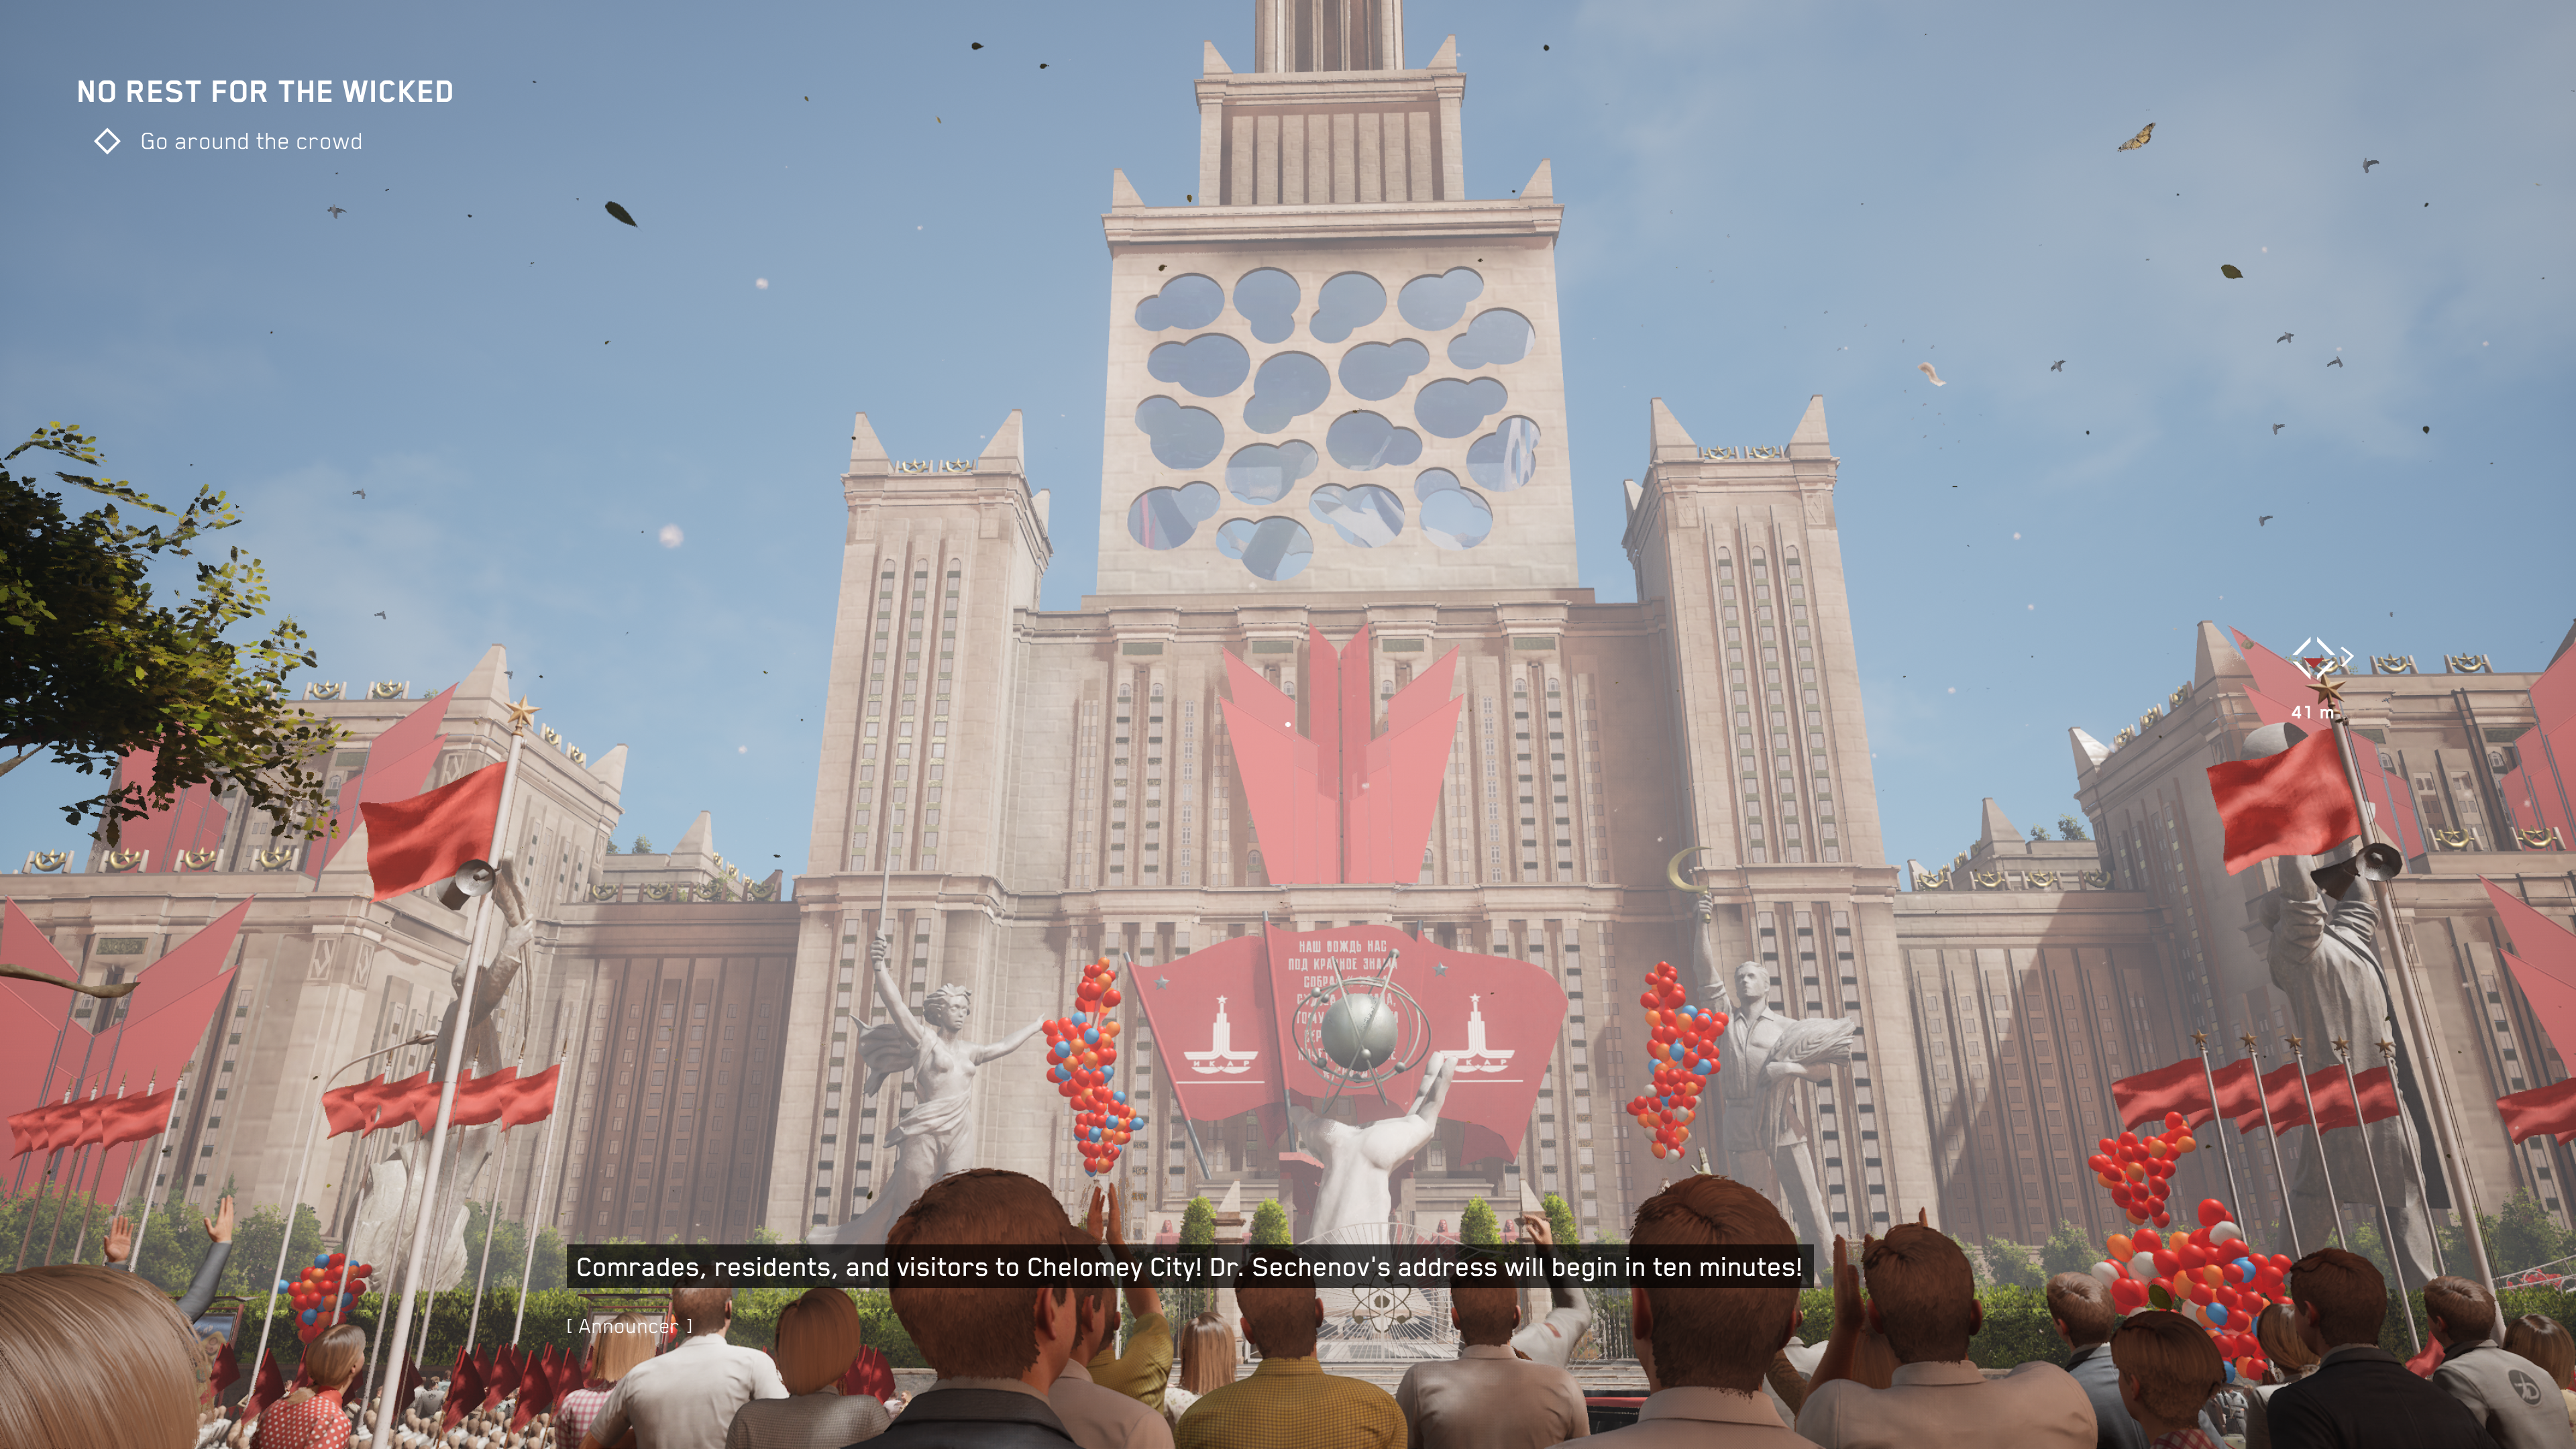 Atomic Heart review - a crowd looks up at a giant government building in white stone draped in red banners against a blue sky during a big parade